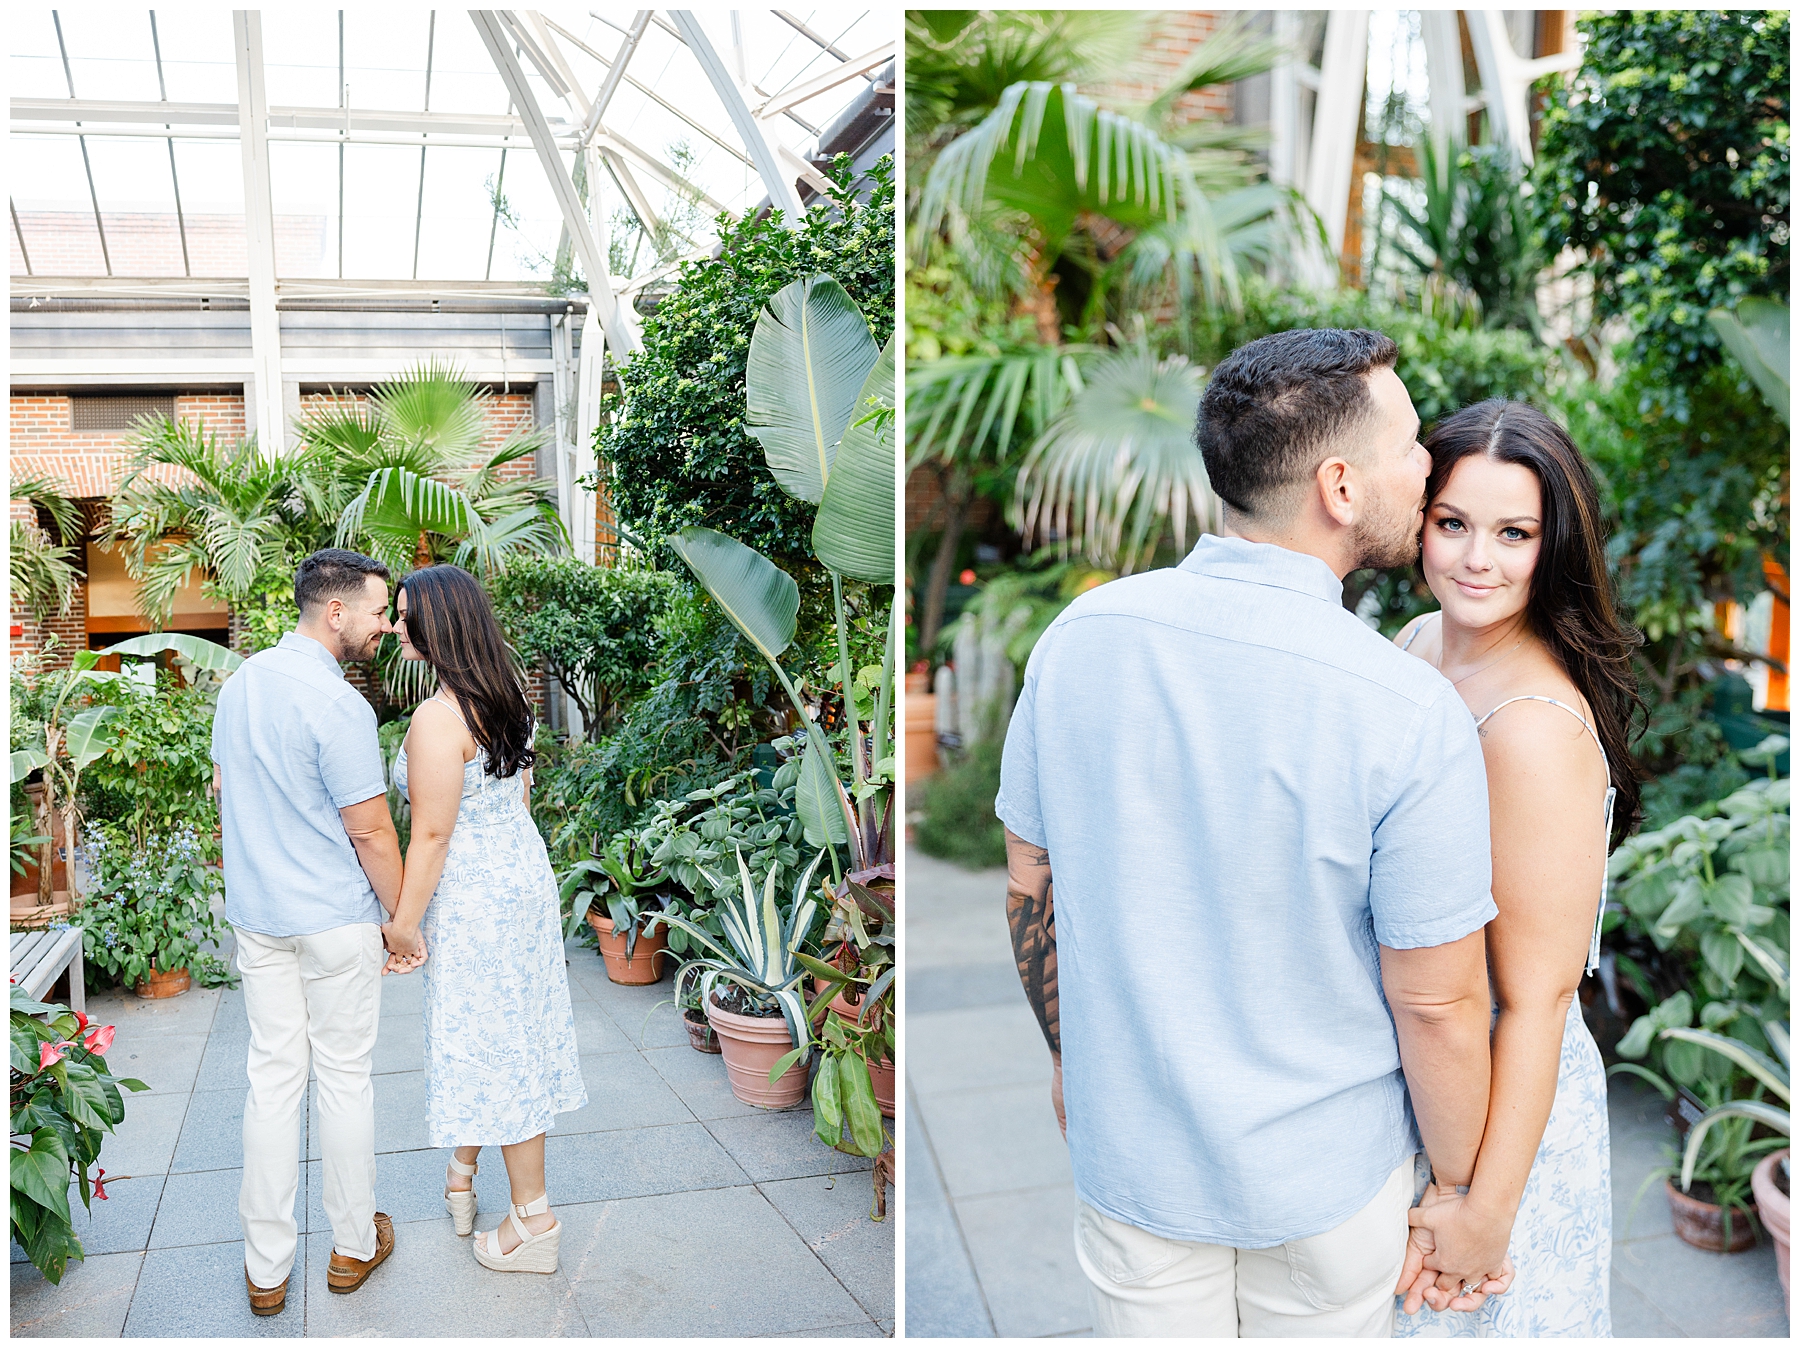 Green House Engagement Session at New England Botanical Gardens 